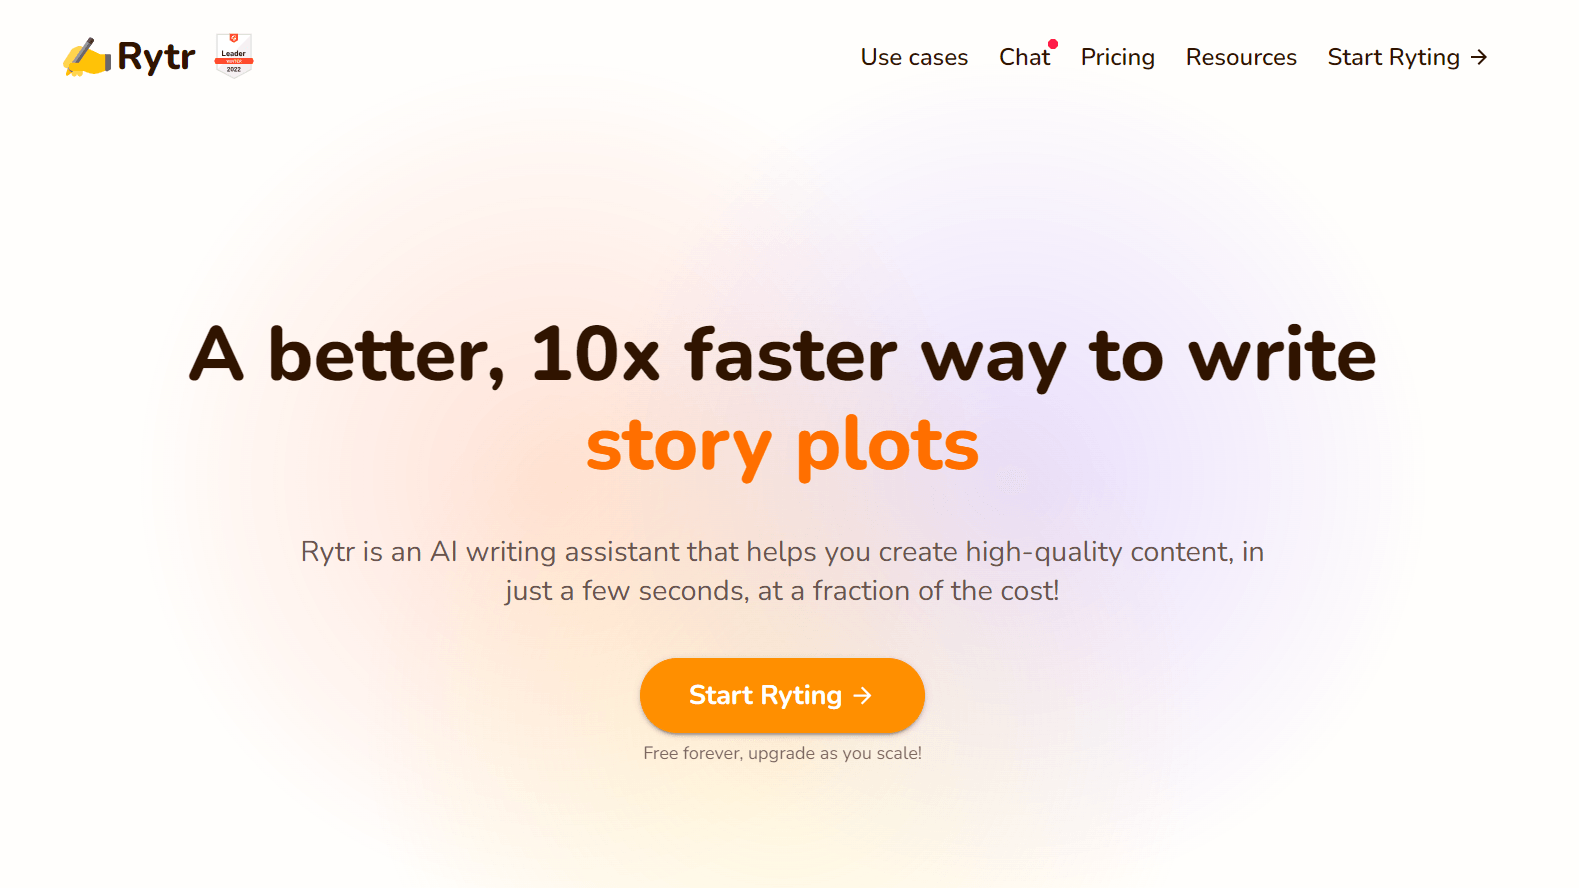 Rytr - Writing Assistant for Generating High-Quality Content